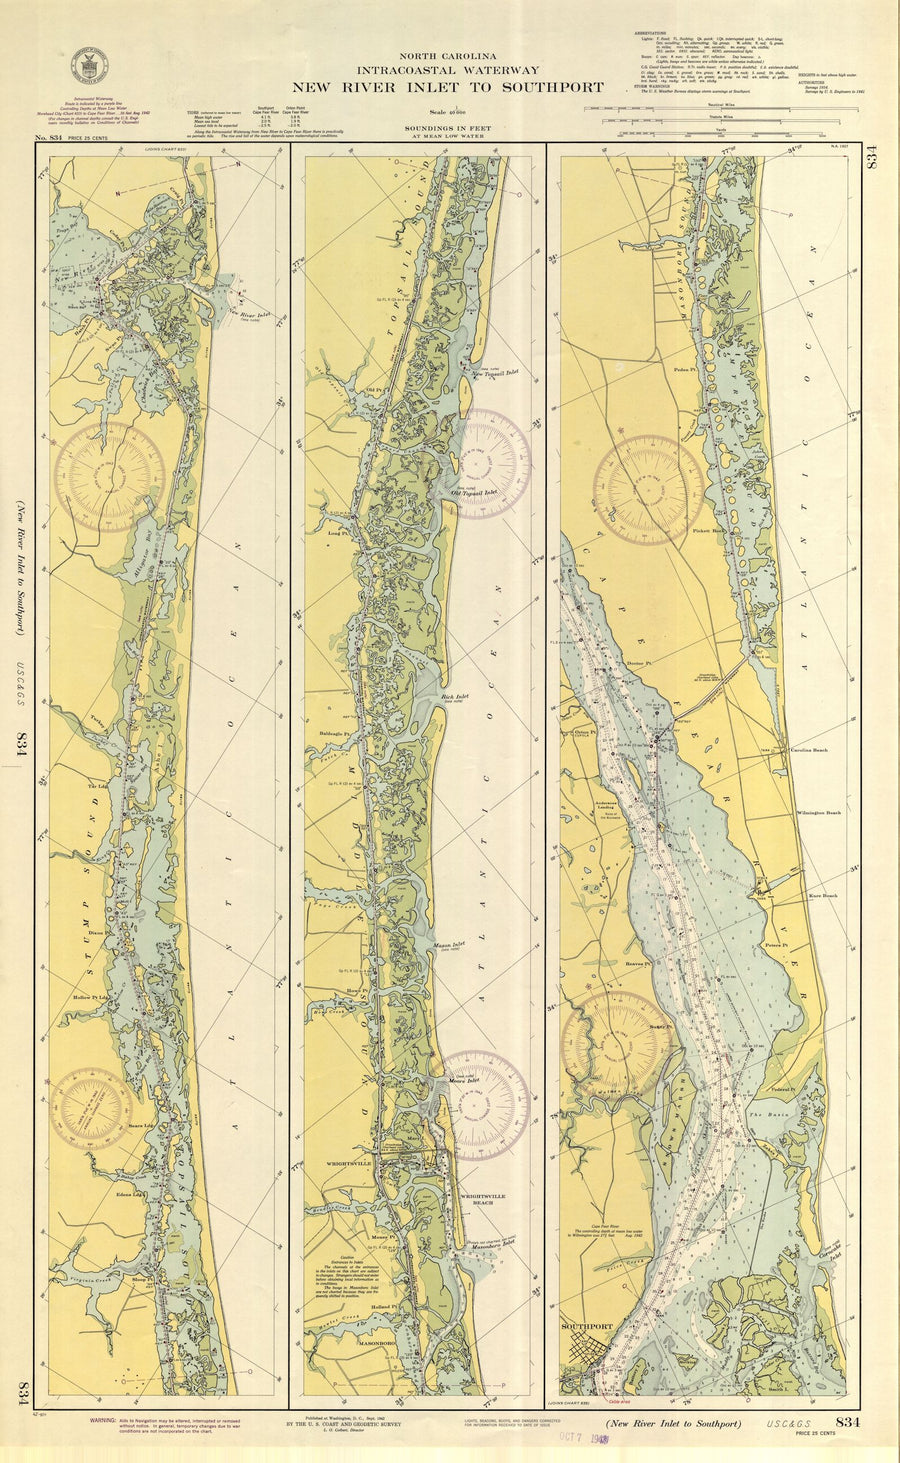 New River Inlet to Southport Map - 1942